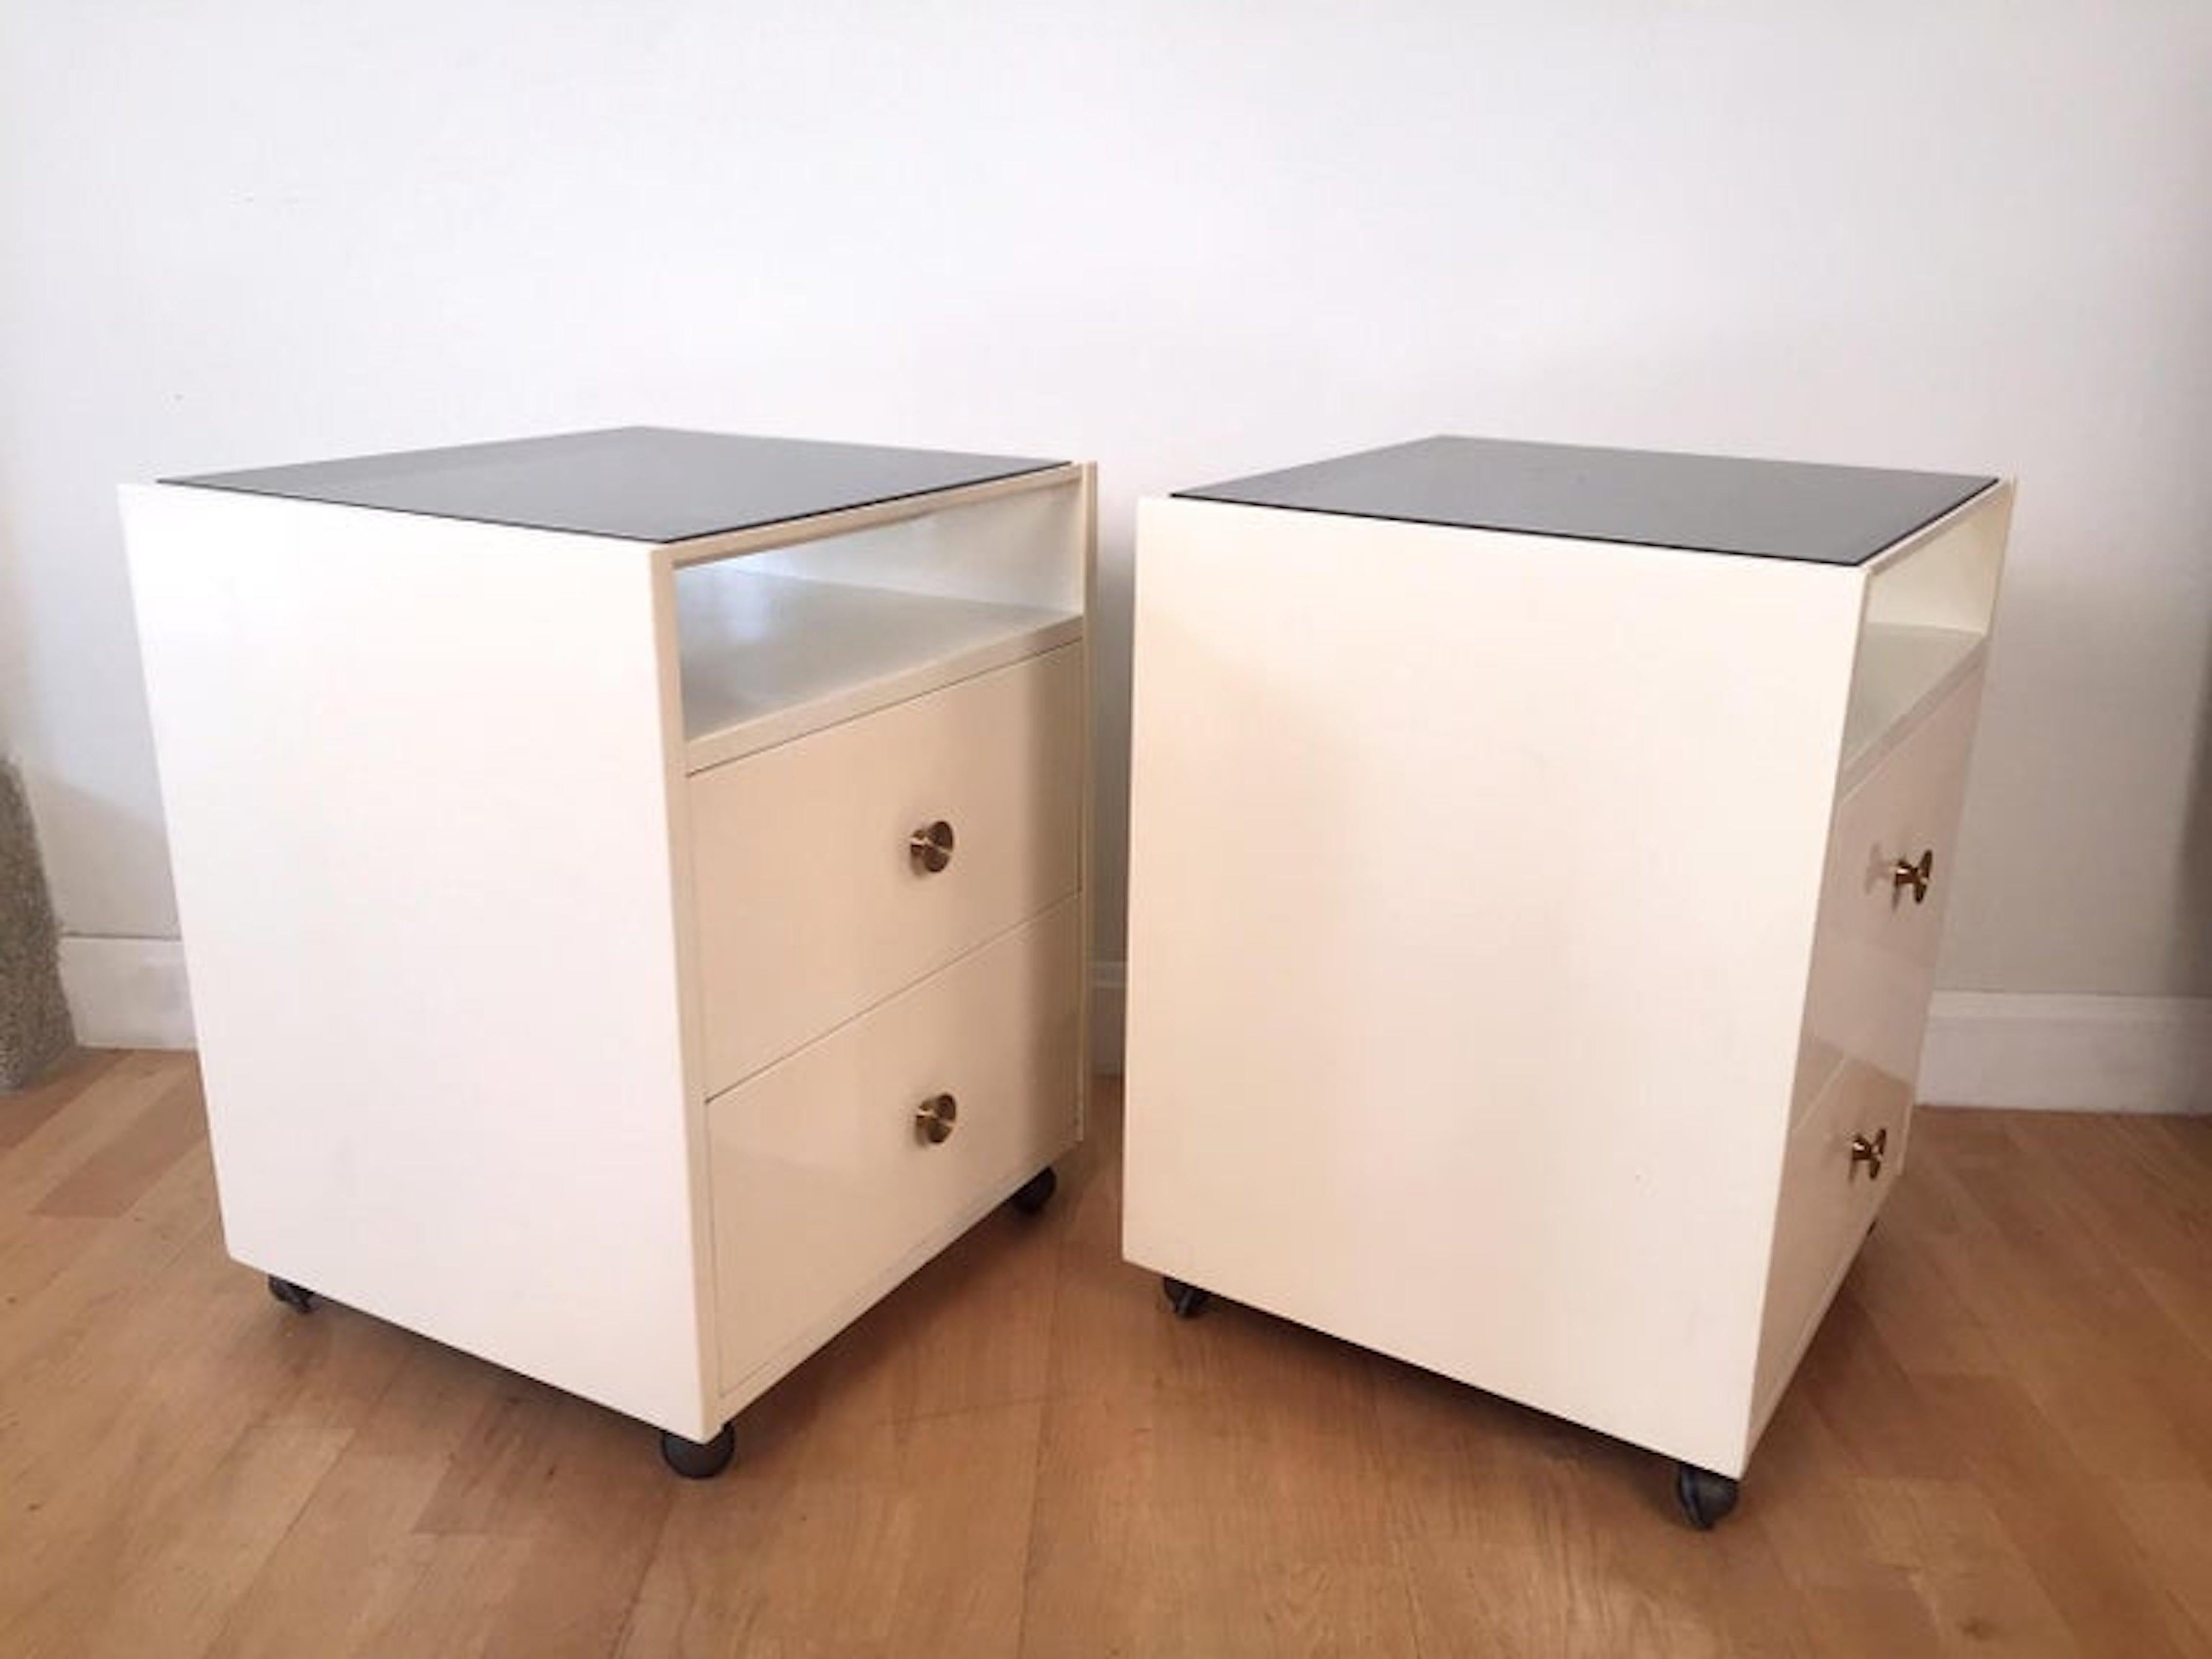 Lacquered Pair of Mid-Century Modern Carlo de Carli Nightstands for Sormani, 1960 For Sale